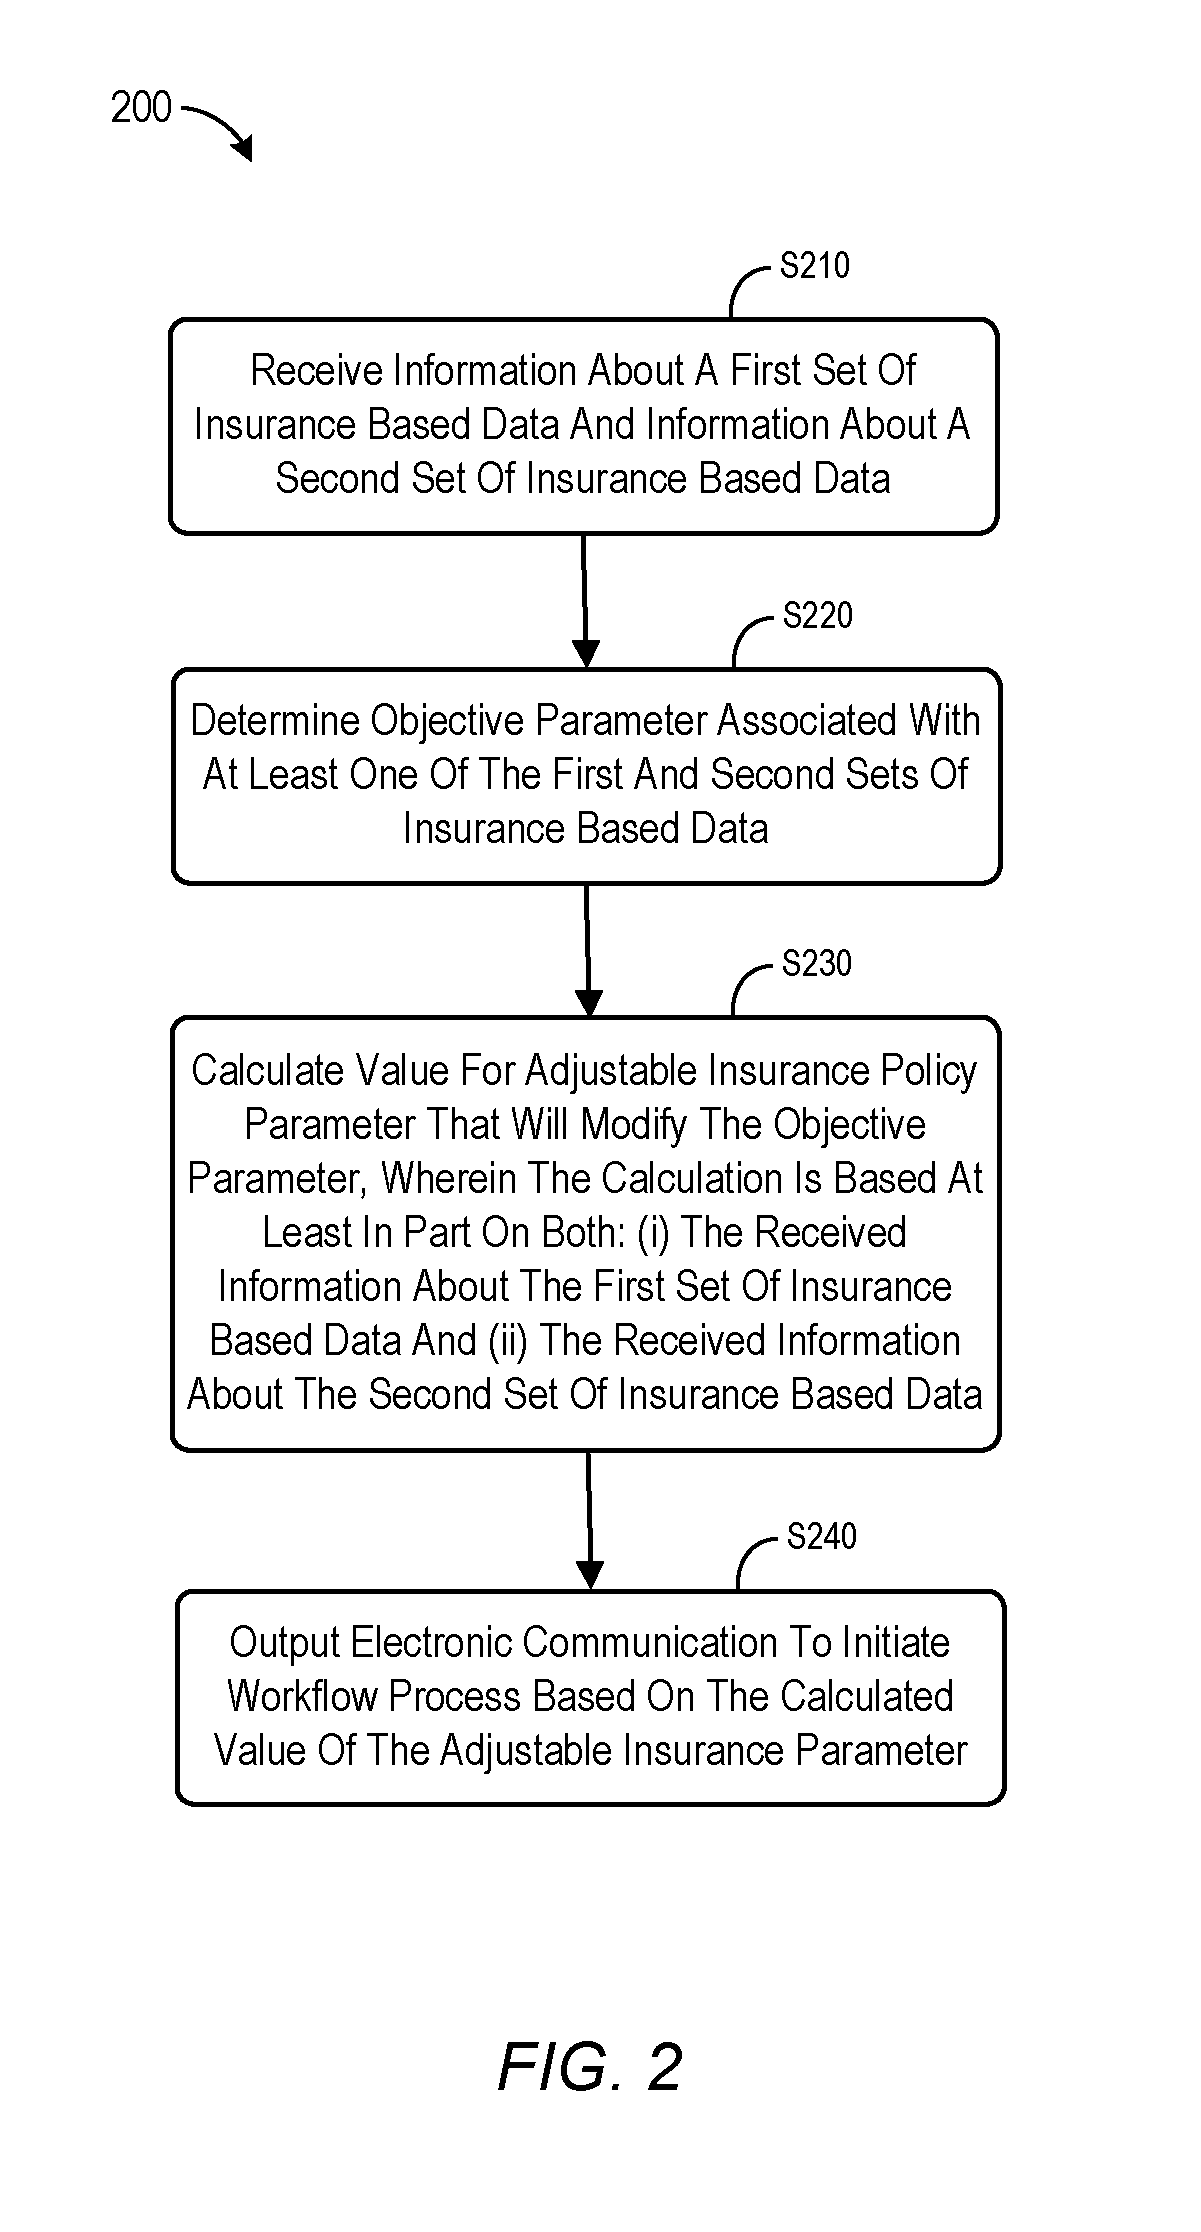 System and method for administering insurance data to mitigate future risks